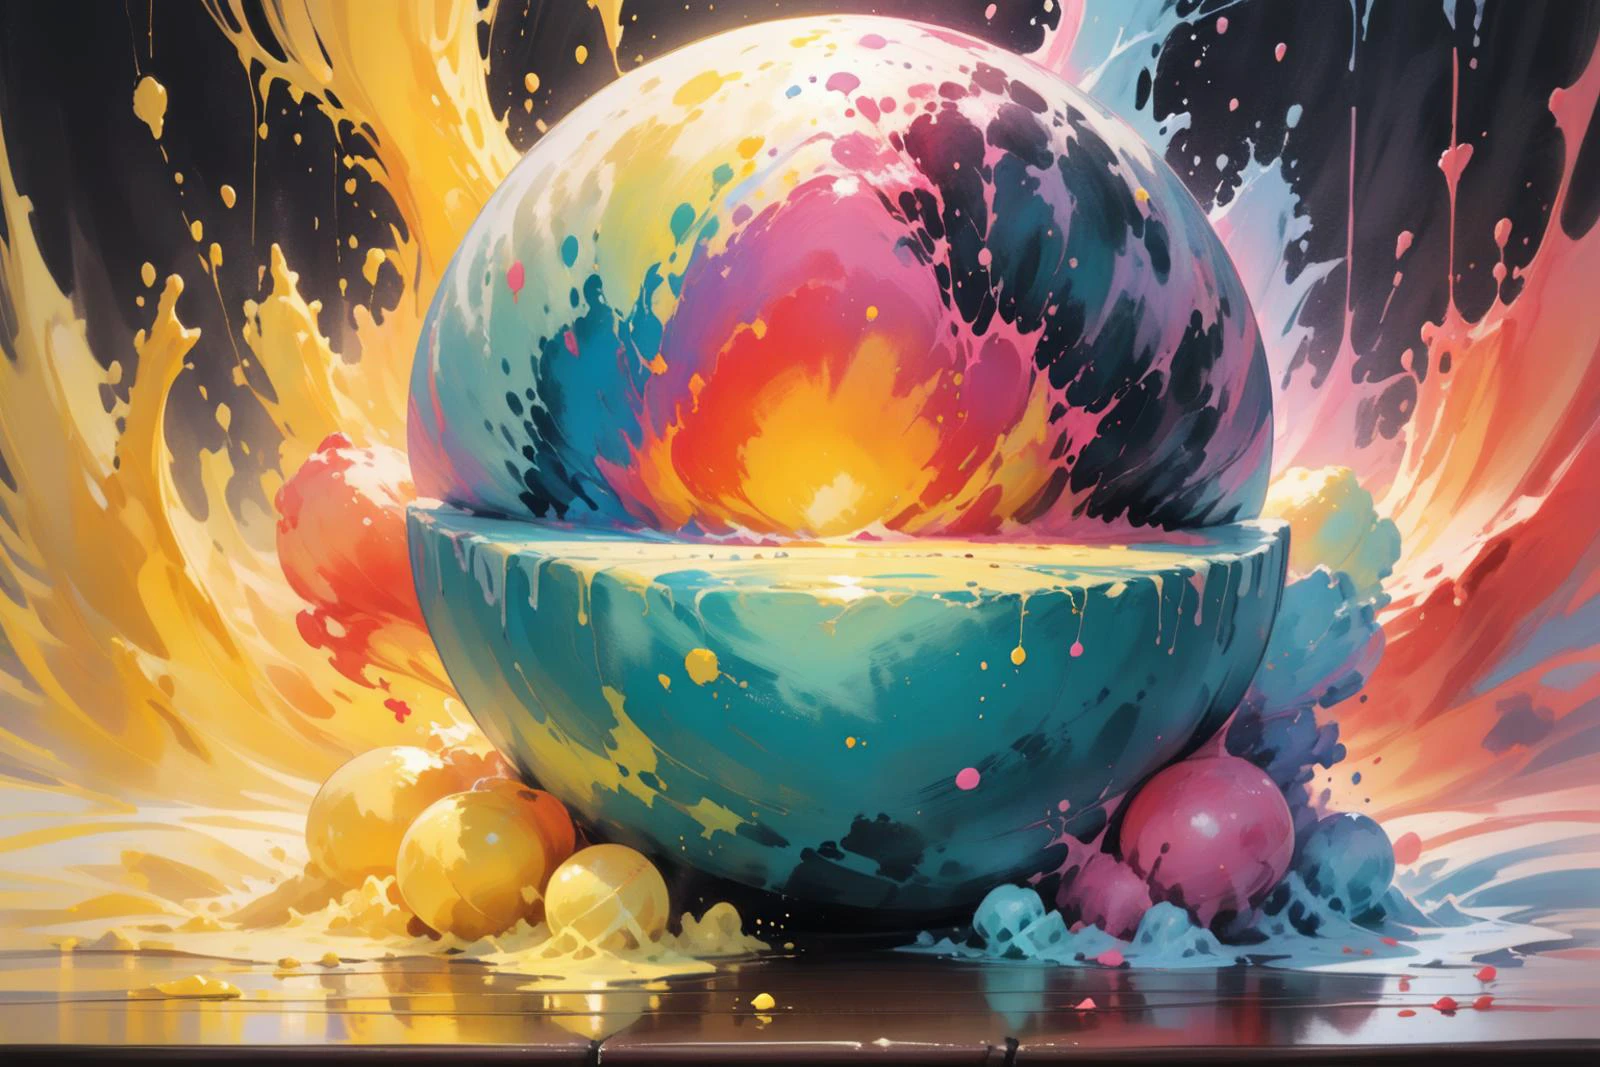 masterpiece, painted world,  colorful splashes, silent giant ball in its mouth lays on top of a tabletop table, Pastel yellow, Dark